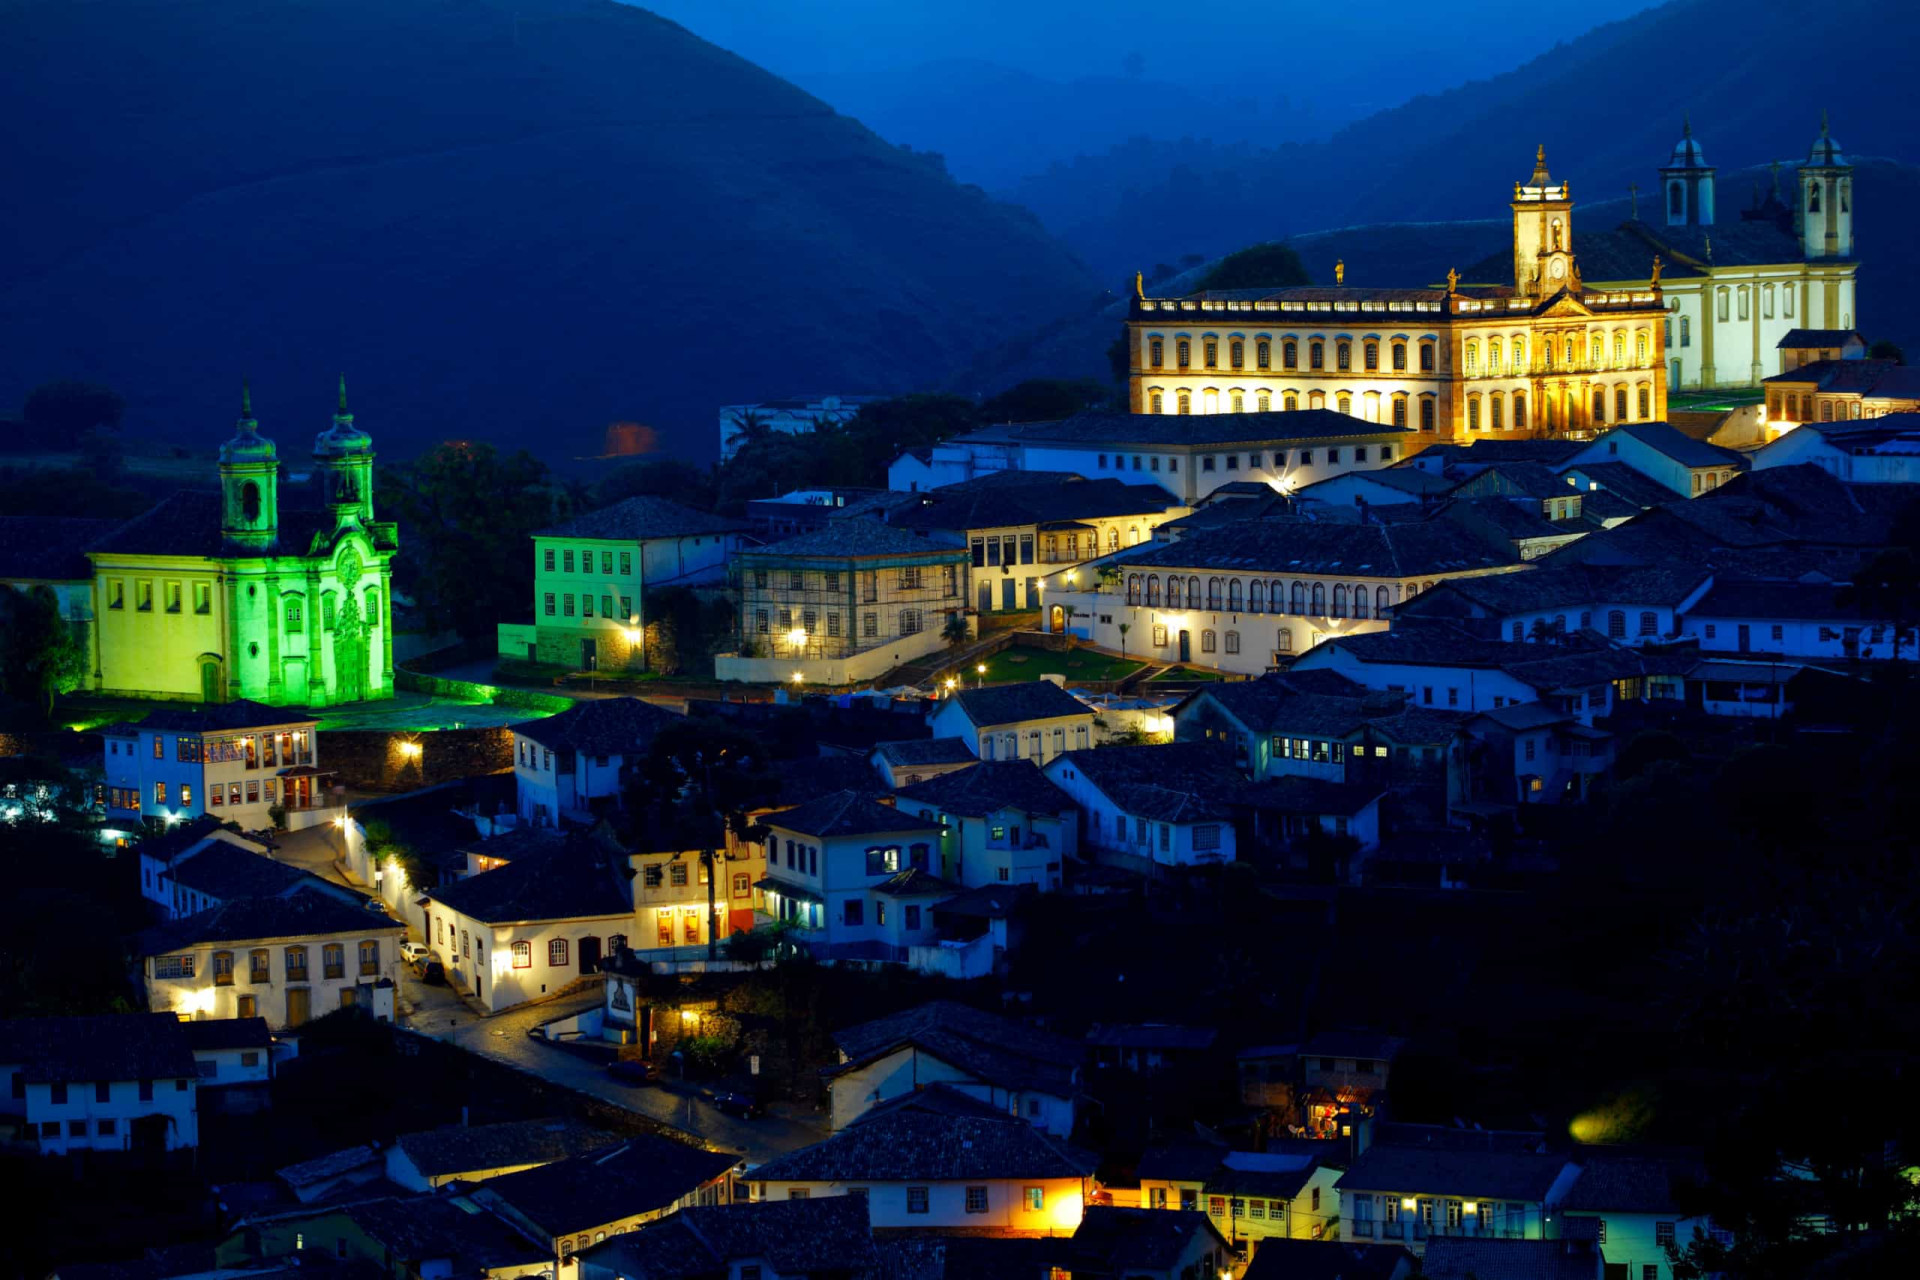 Location: Minas Gerais state<br>Criteria: Cultural<br>Year established: 1980<br>Description: A major gold-producing city during the Brazilian Gold Rush, which started in the 1690s, Ouro Preto today is equally valuable for its large number of preserved Baroque churches, bridges, and fountains.<p>You may also like:<a href="https://www.starsinsider.com/n/319168?utm_source=msn.com&utm_medium=display&utm_campaign=referral_description&utm_content=413555v12en-us"> 20-year-review: see how much (or little) your favorite stars have aged</a></p>